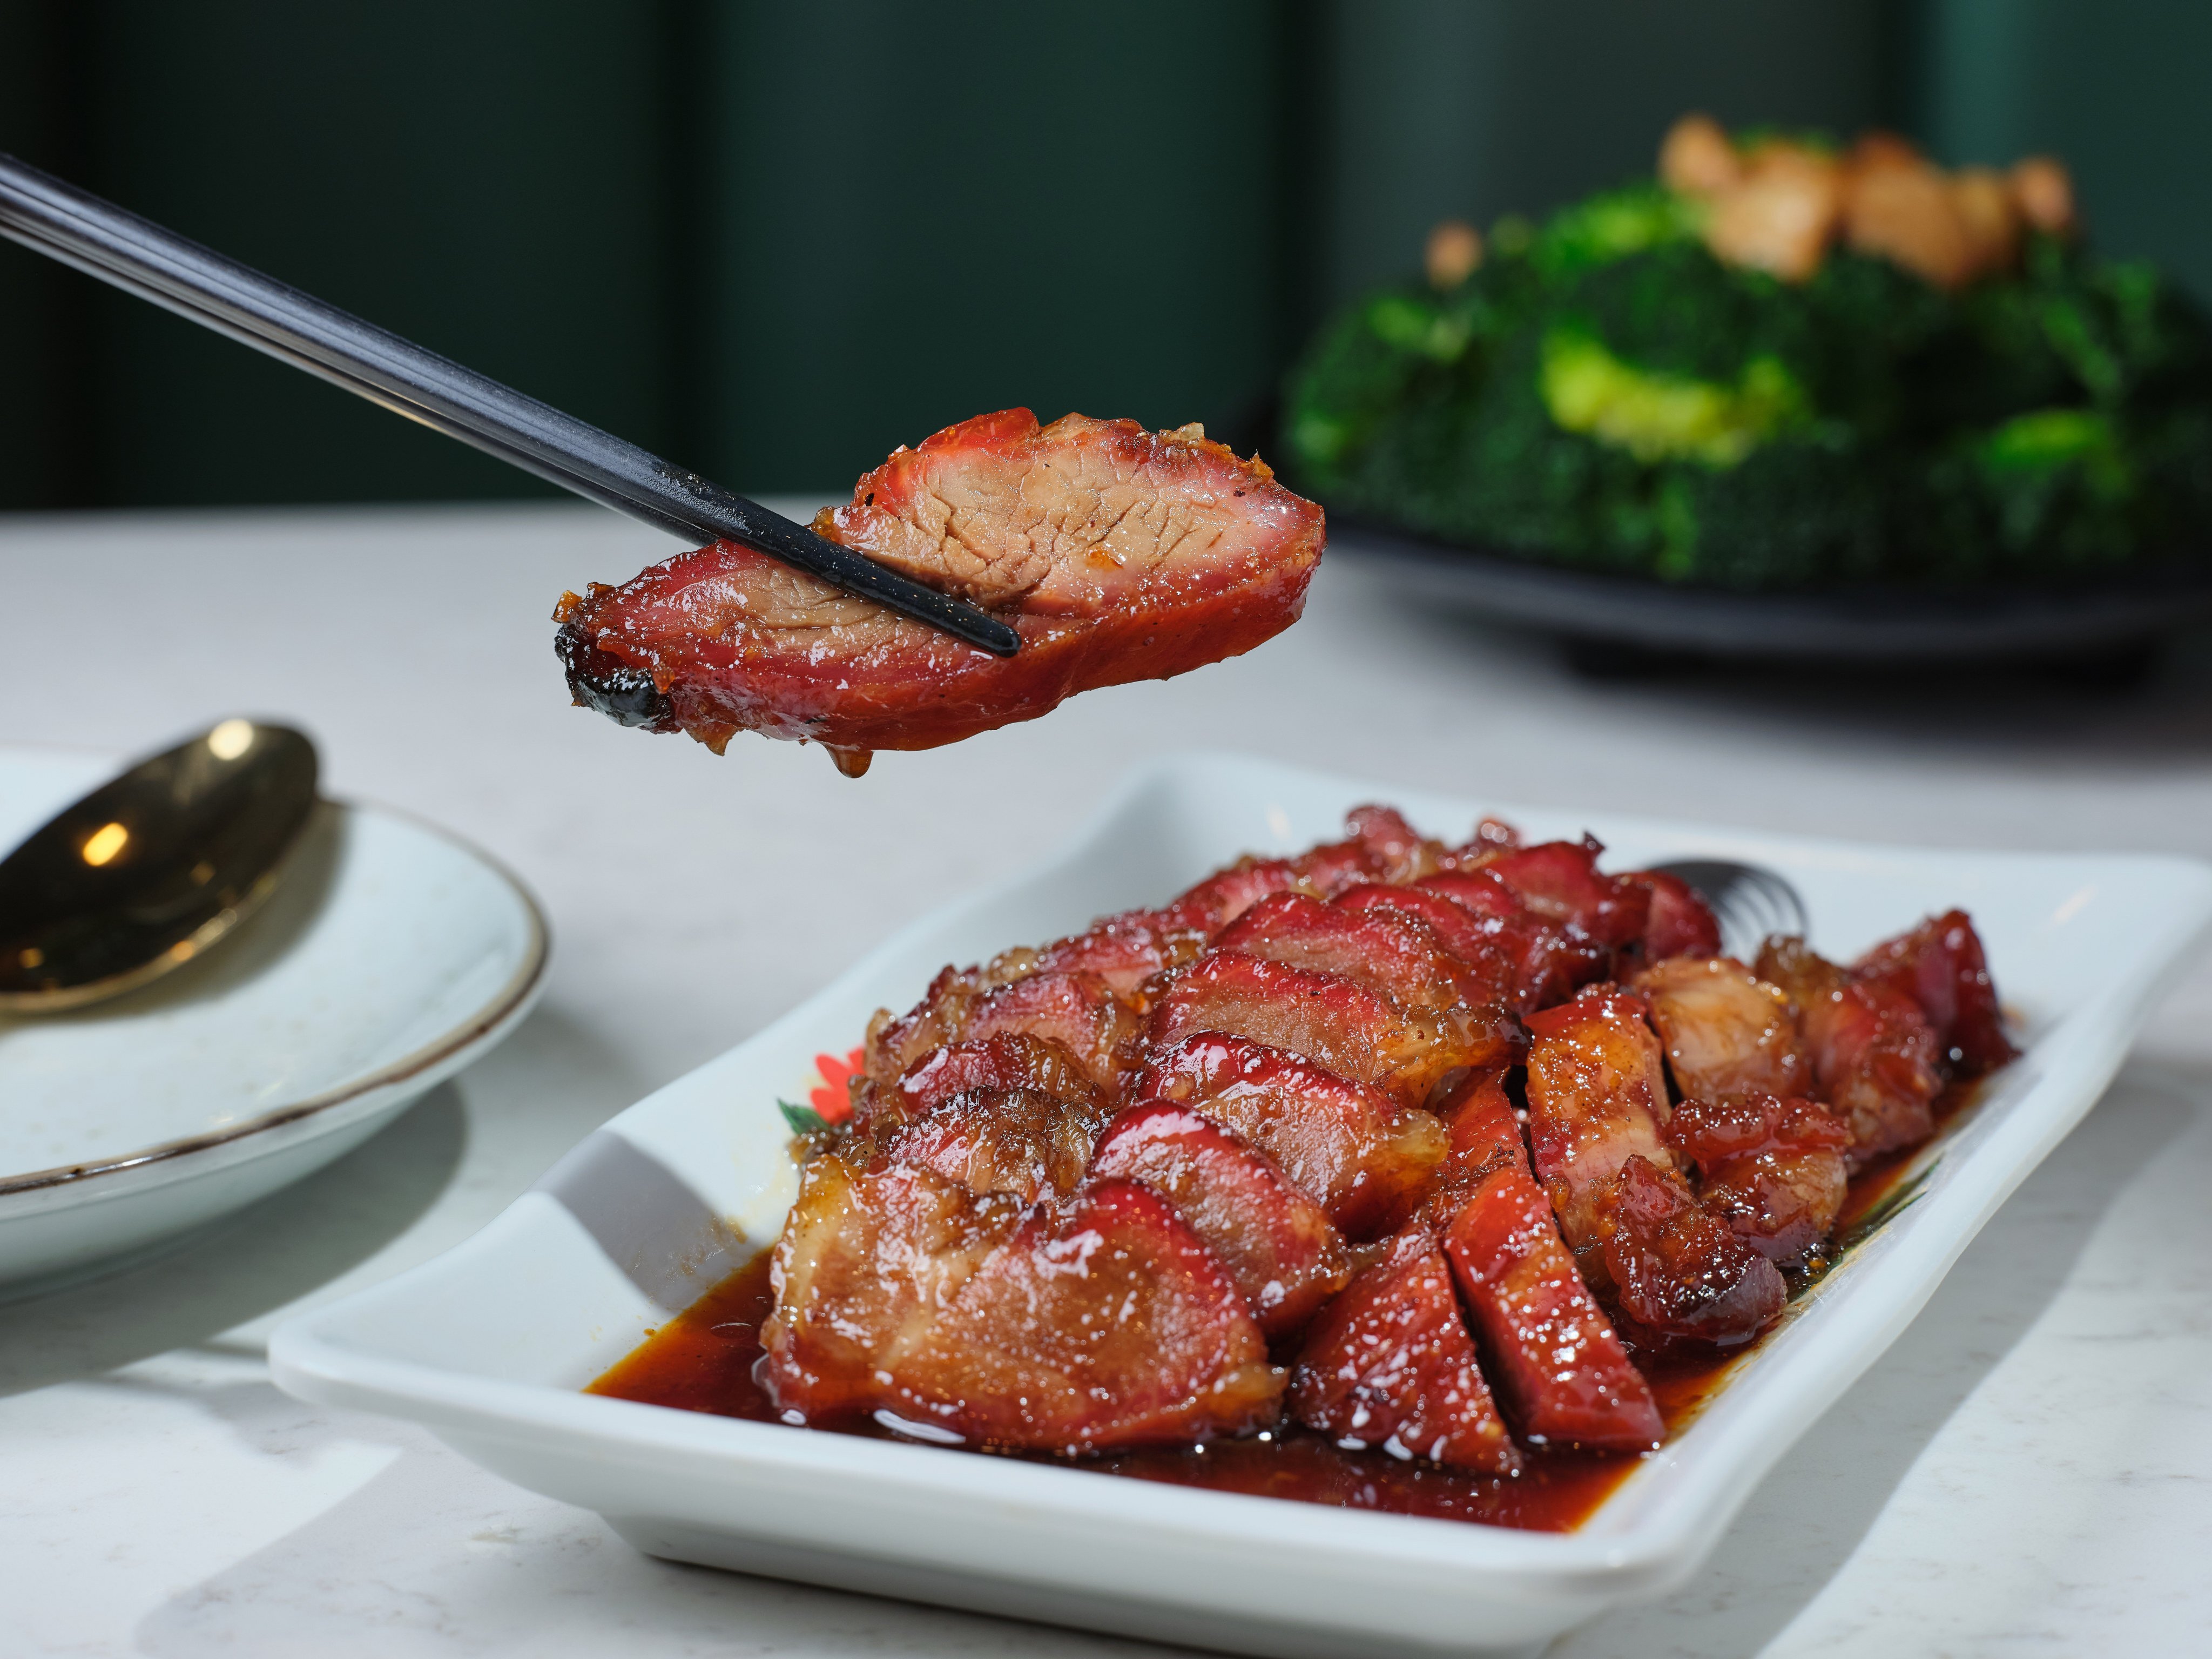 Char siu, or barbecue pork, is a much-loved staple of Cantonese food. Photo: Alex Chan